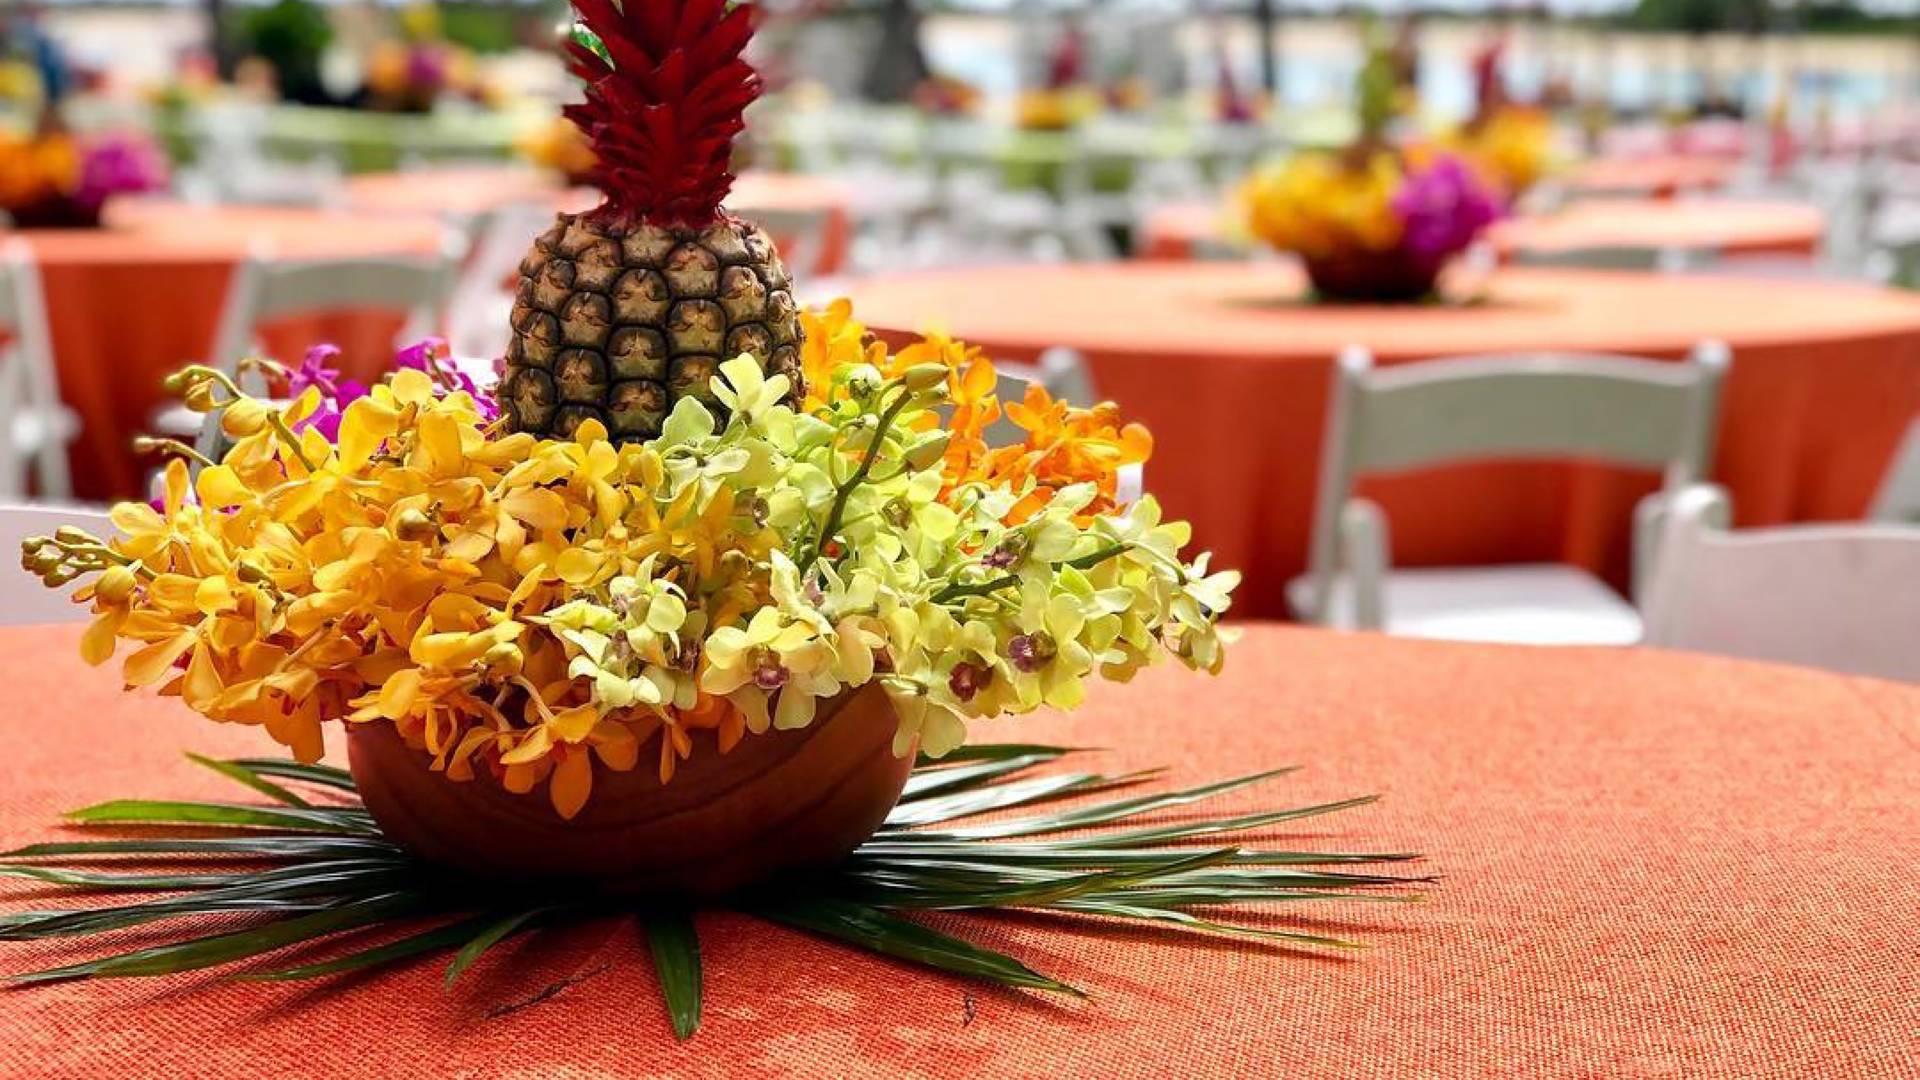 Pineapple and Flowers on a Table at Great Lawn for an  Outdoor Event